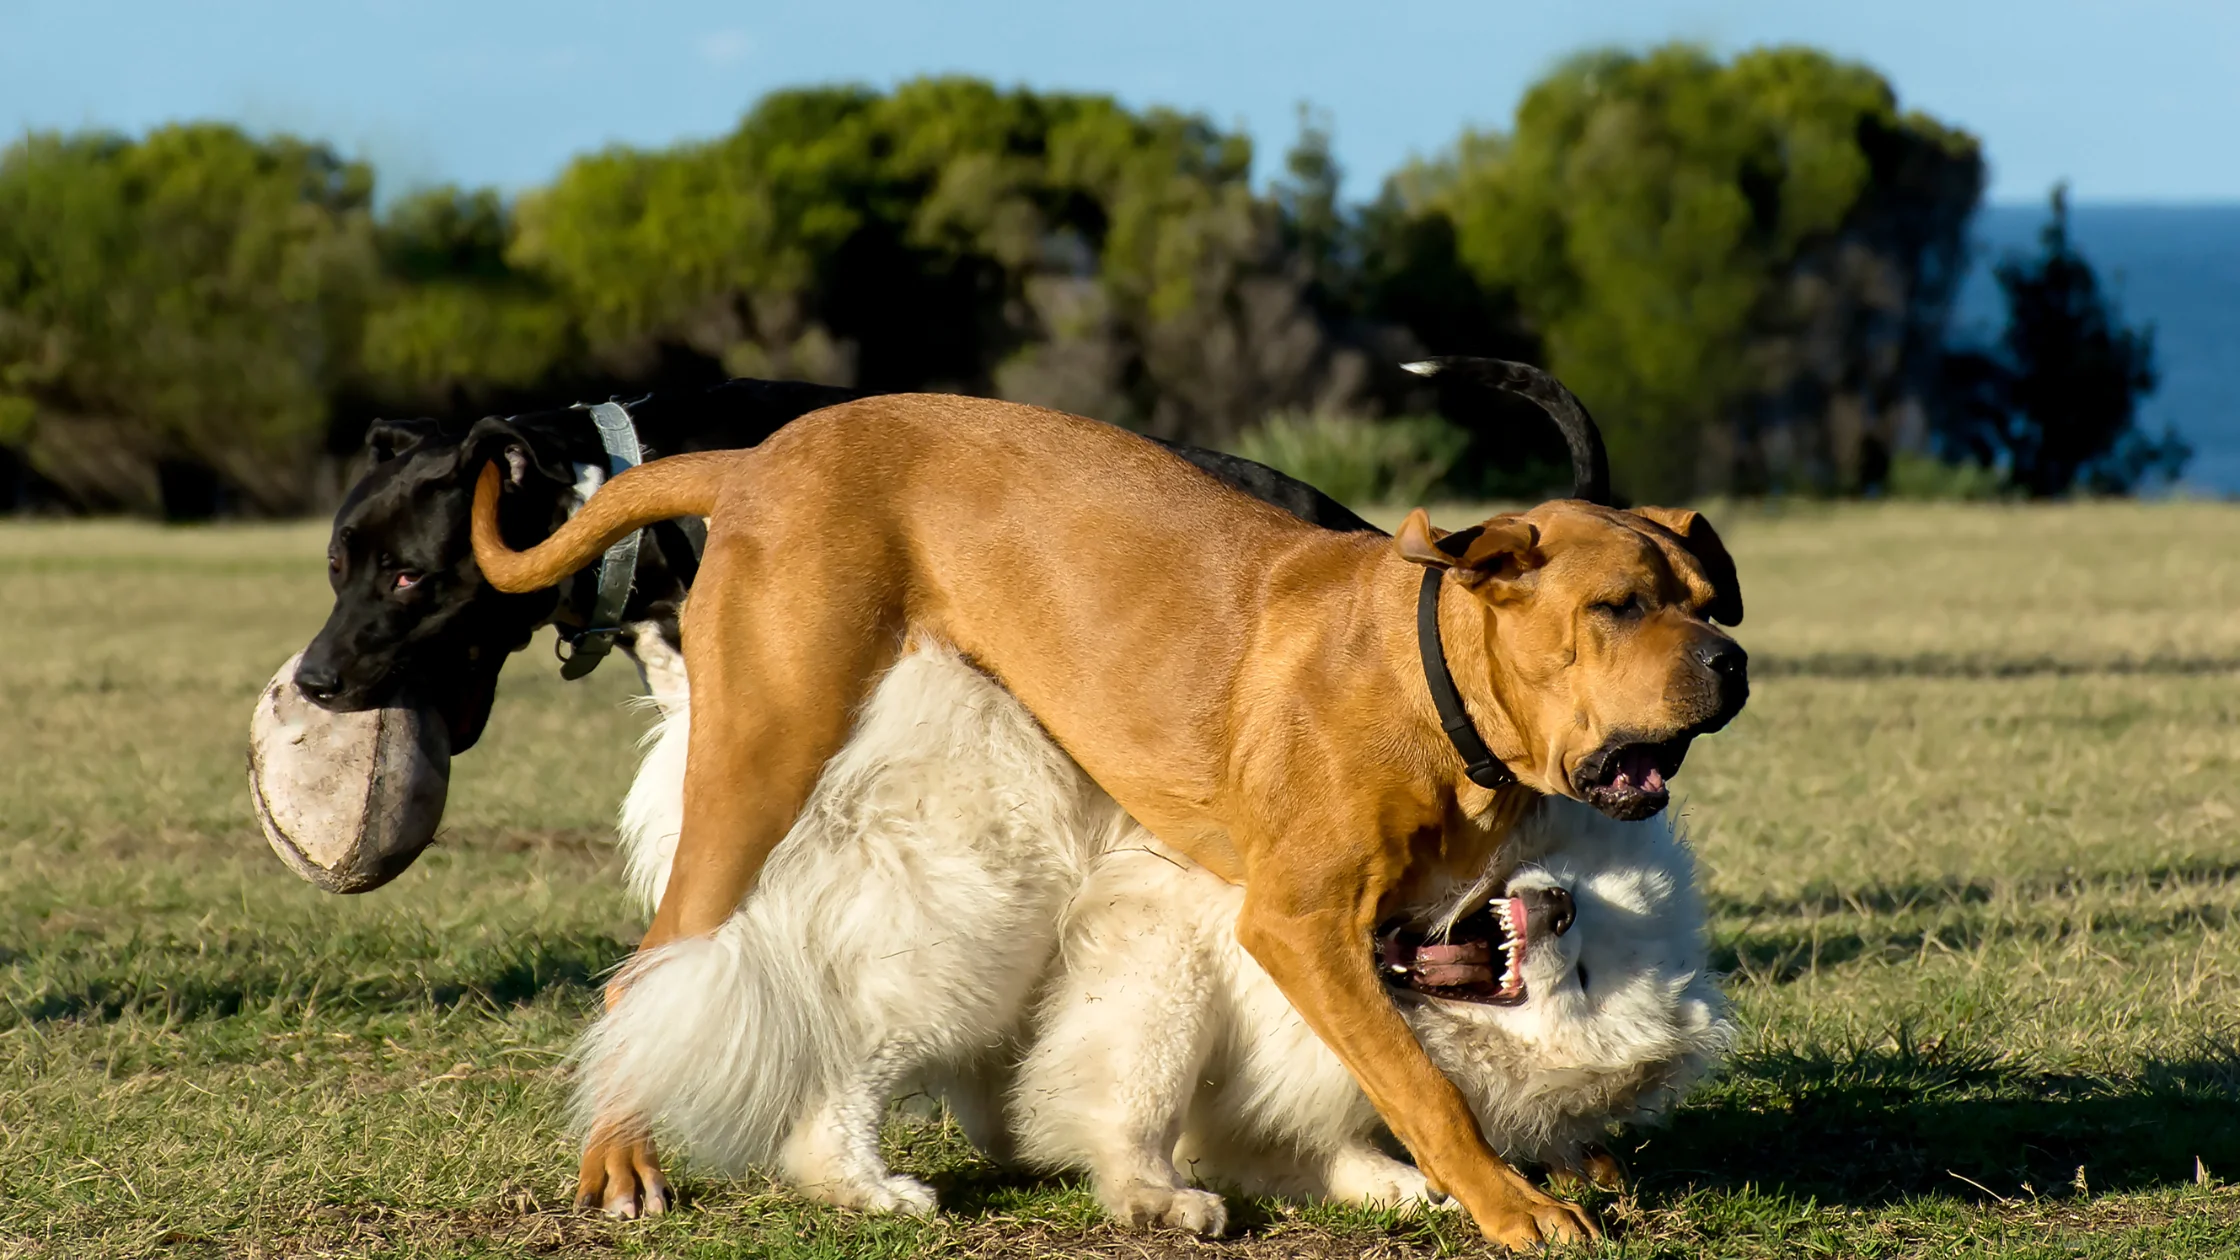 How to Tell if a Dog Fight is Serious